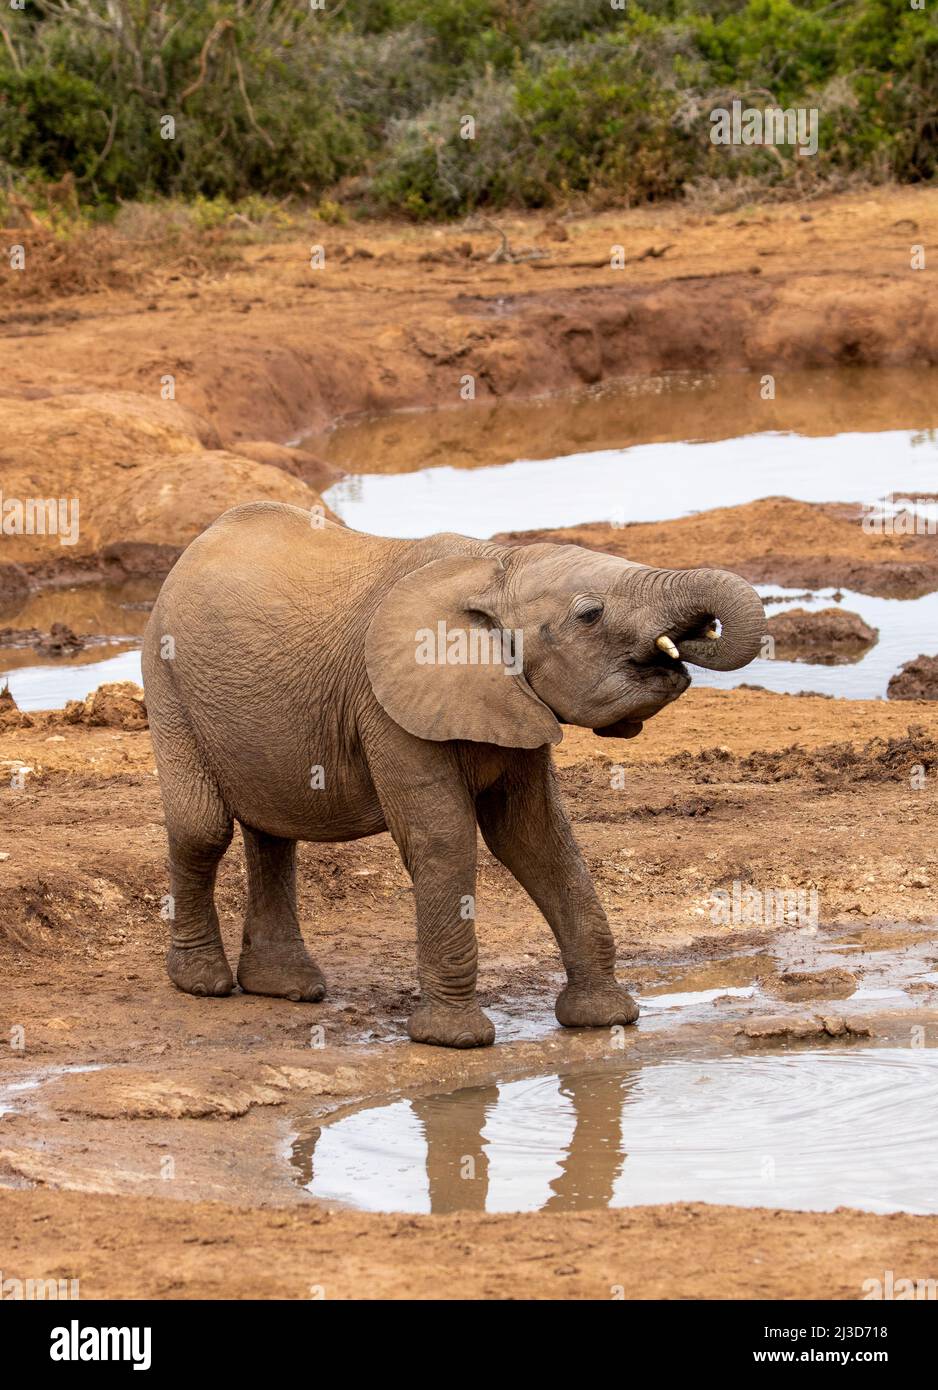 African elephant drinking water at a waterhole, Addo Elephant National Park Stock Photo